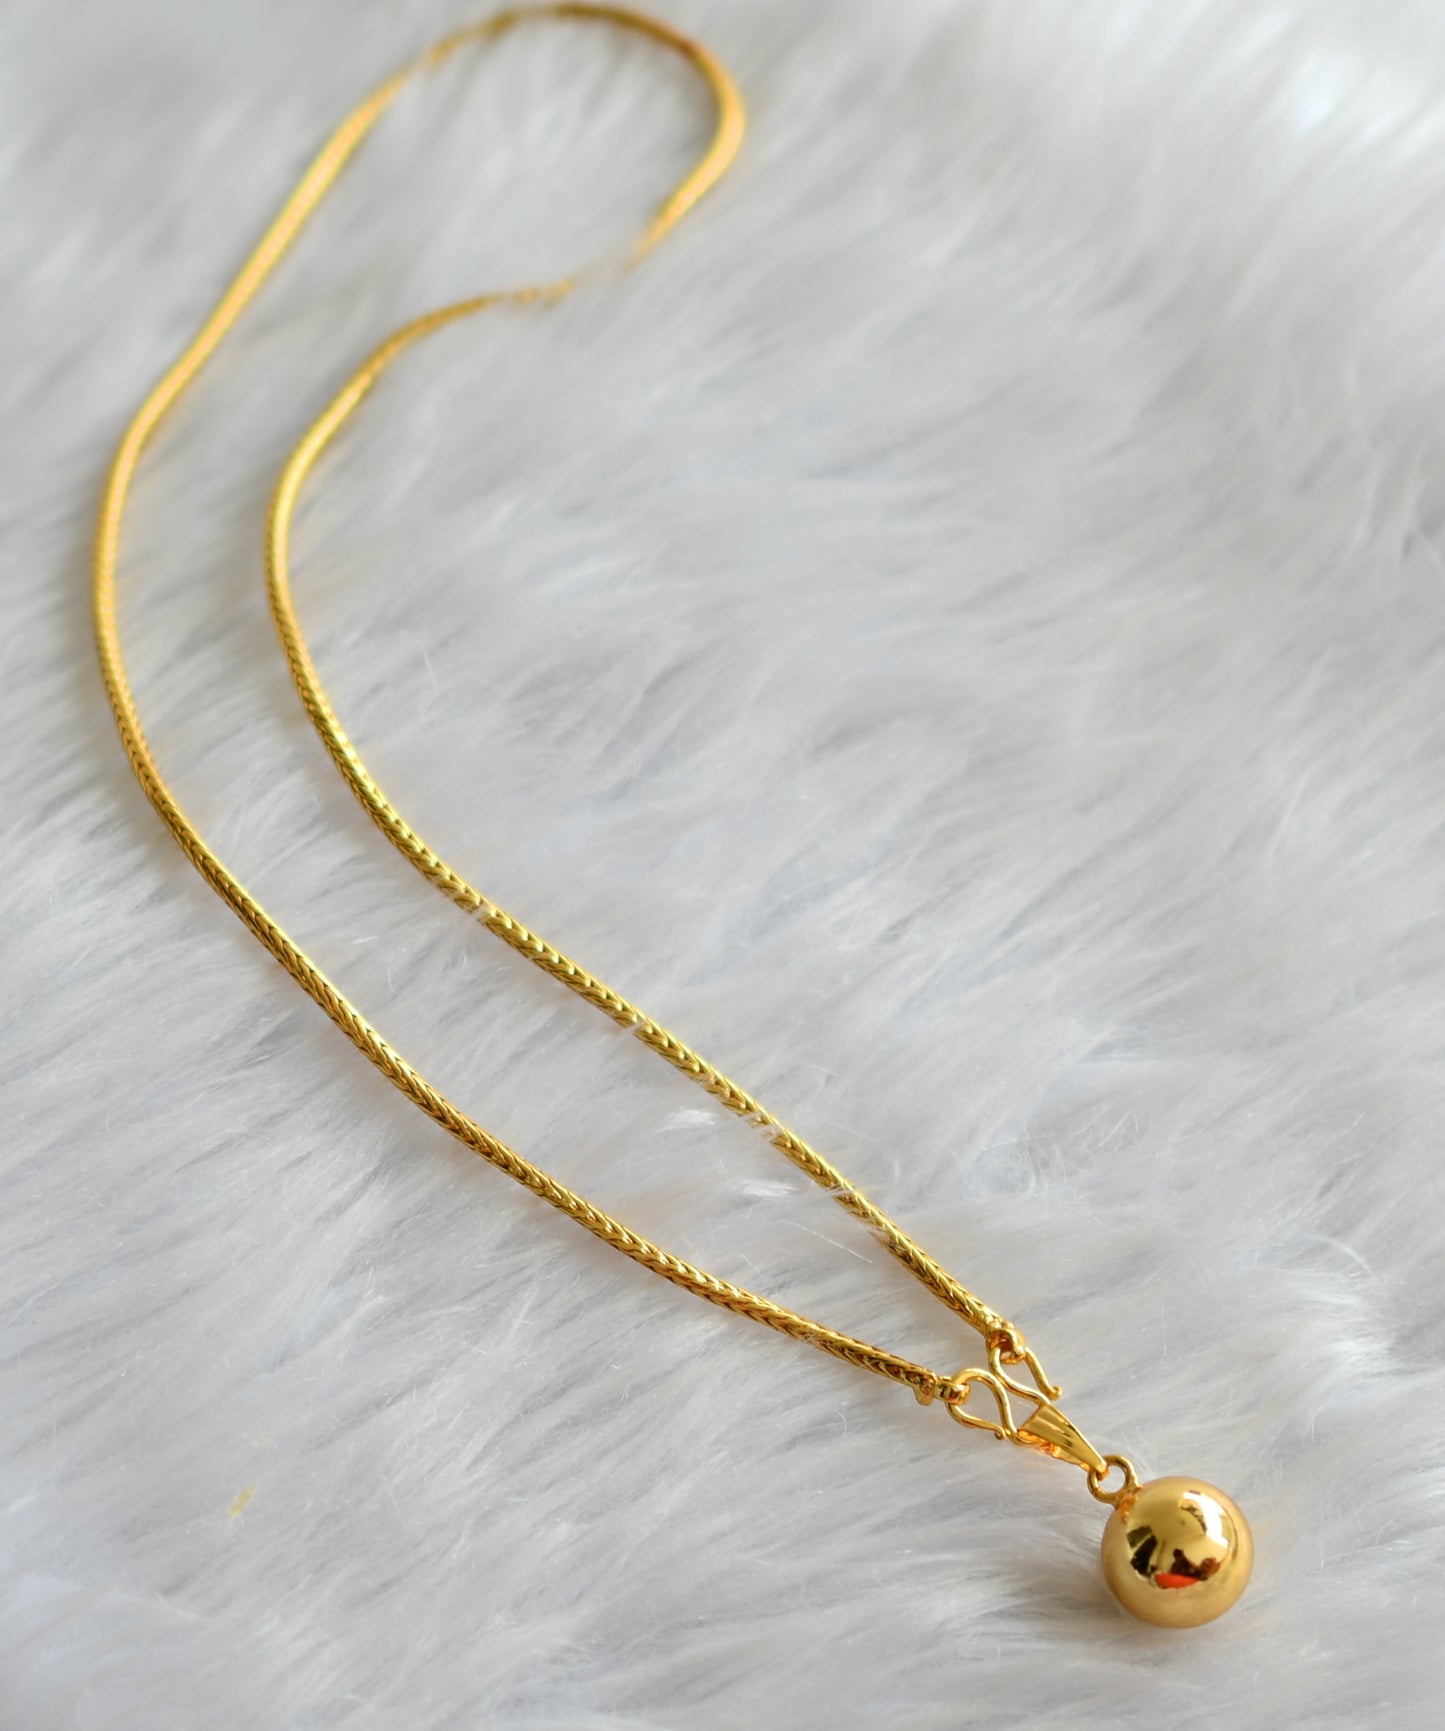 Gold tone 18 inches chain with ball pendant dj-43120